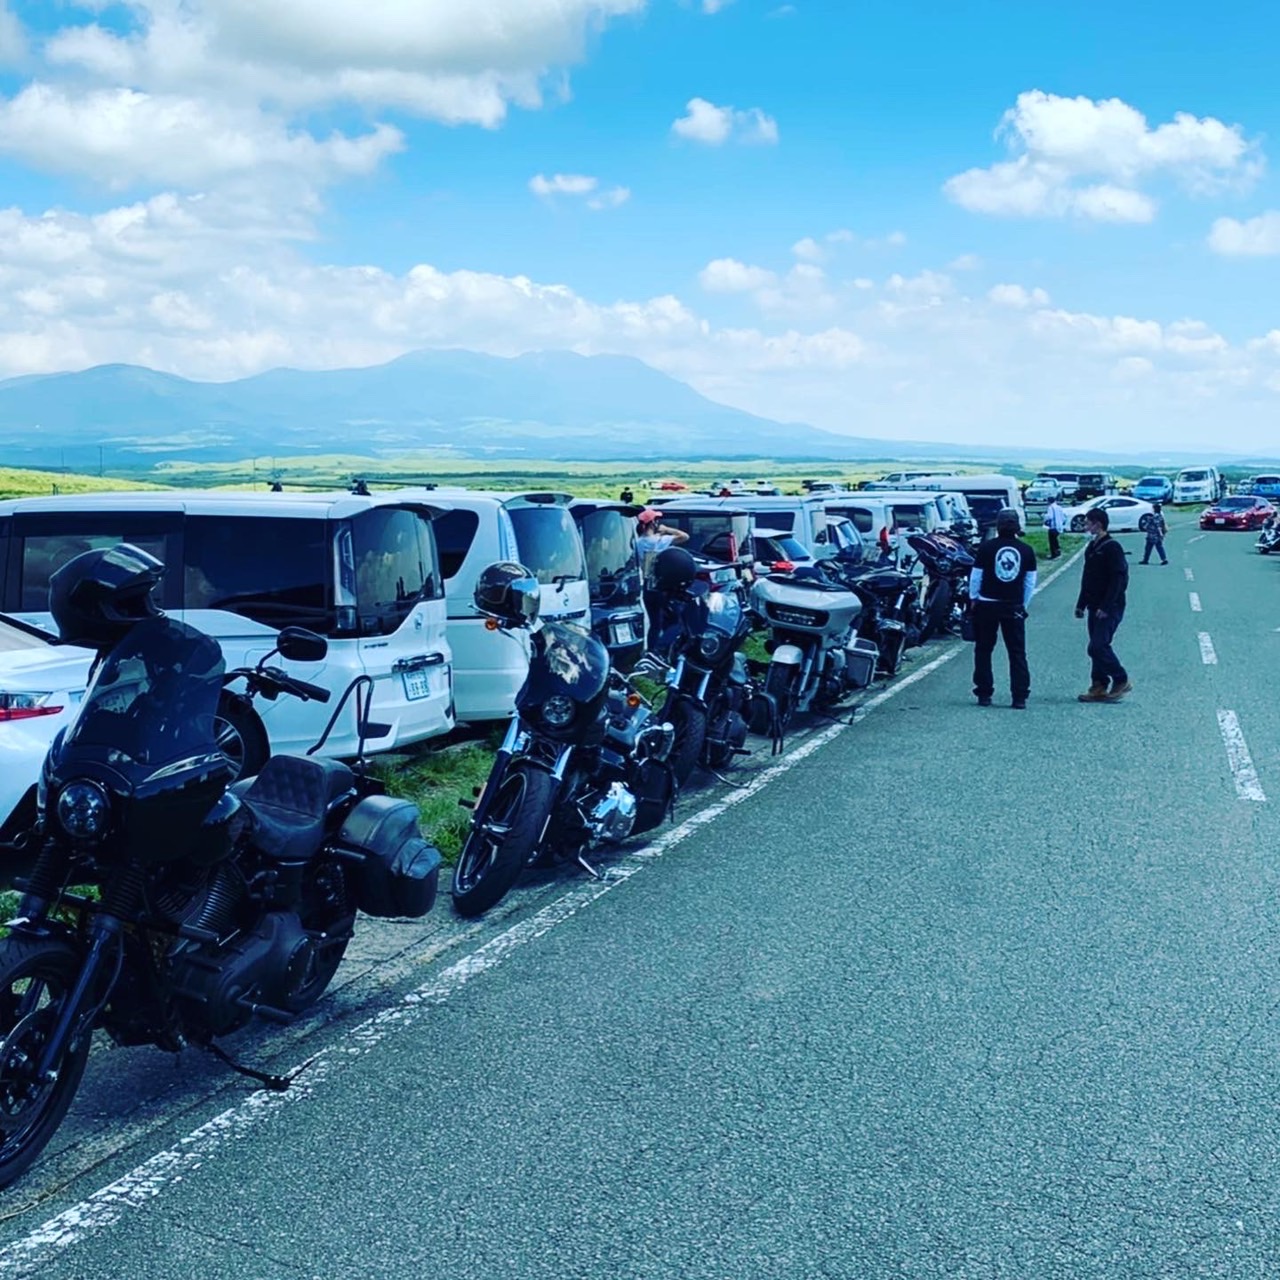 You are currently viewing ☆ Harley Davidson Touring 熊本～大分 2021 ☆